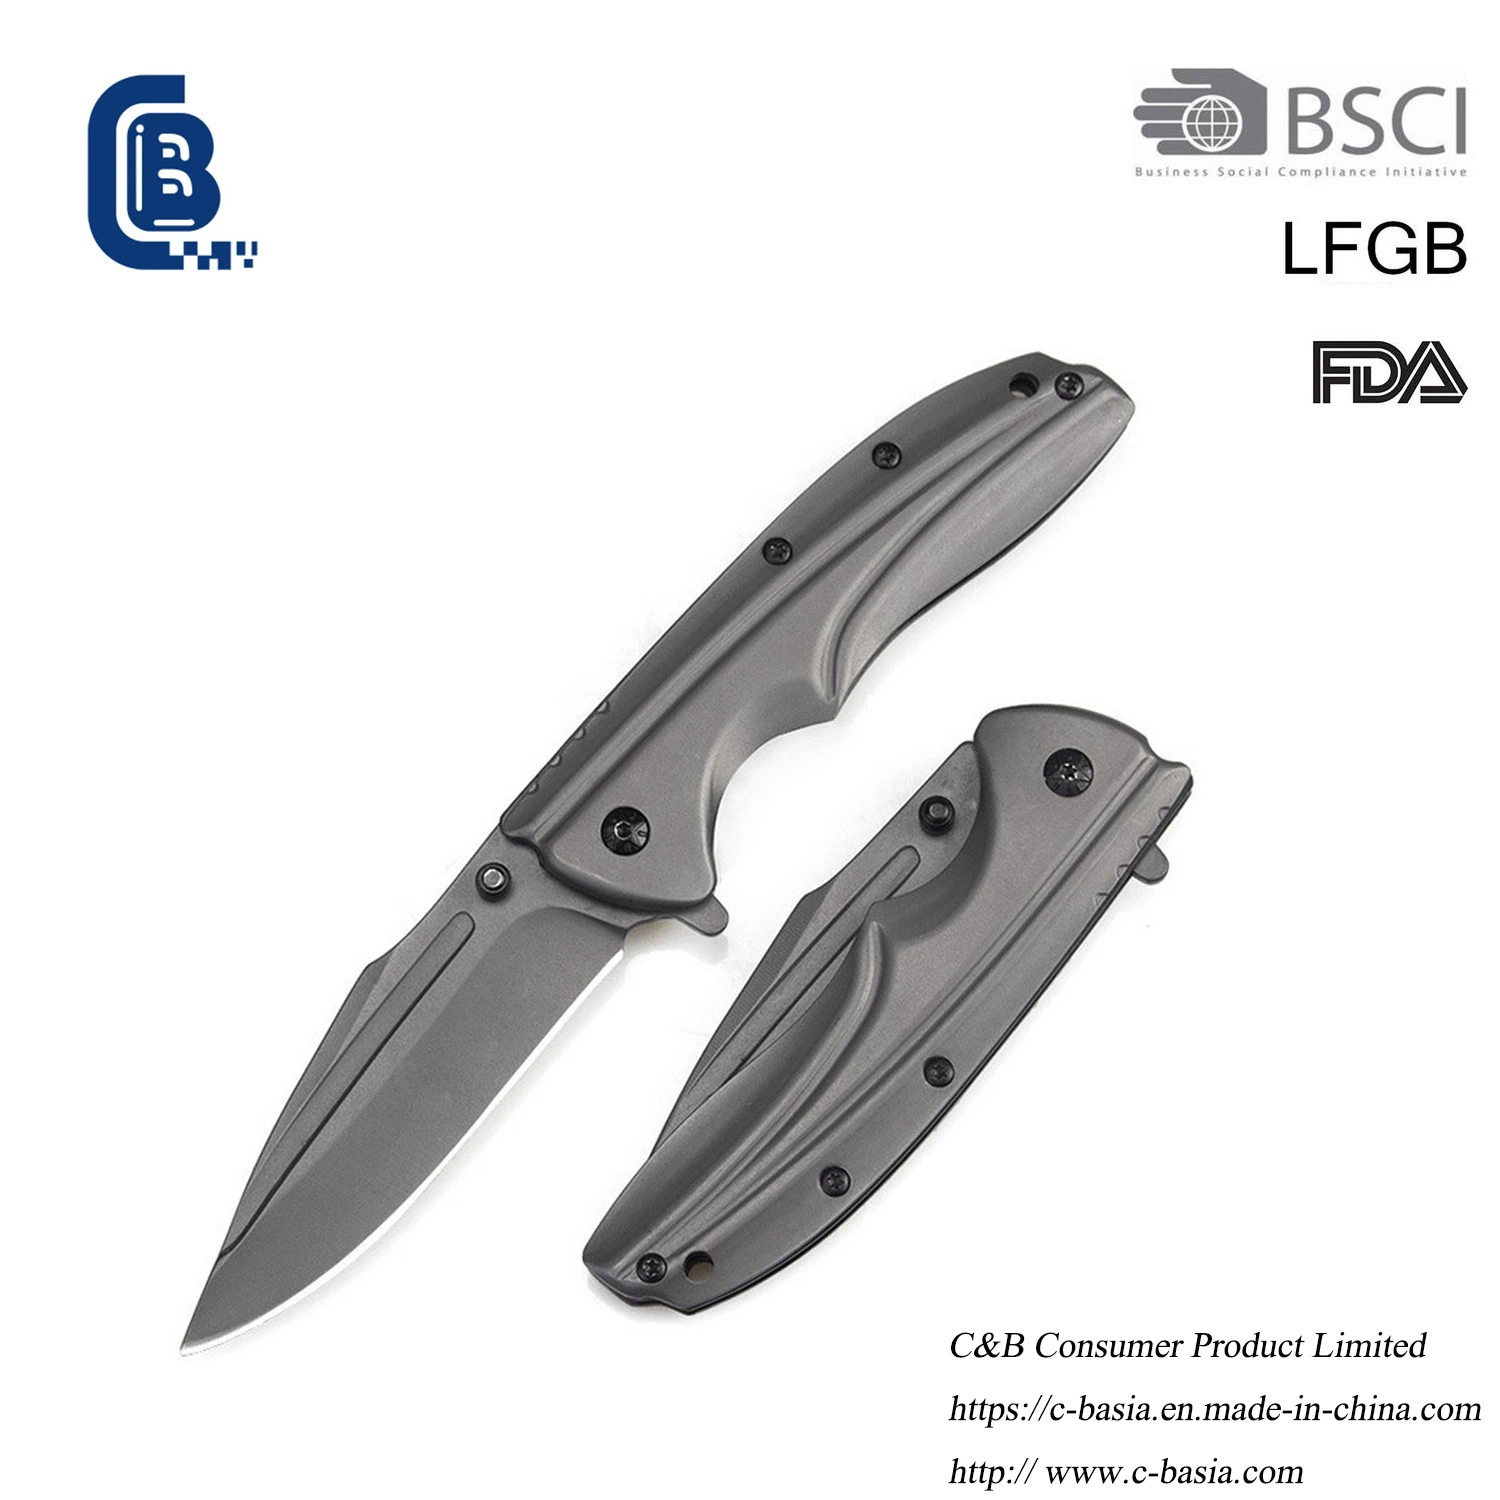 5" Stainless Steel Multifunctional Tactical Survival Camping Combat Knife Hunting Hand Tools Pocket Outdoor Knife